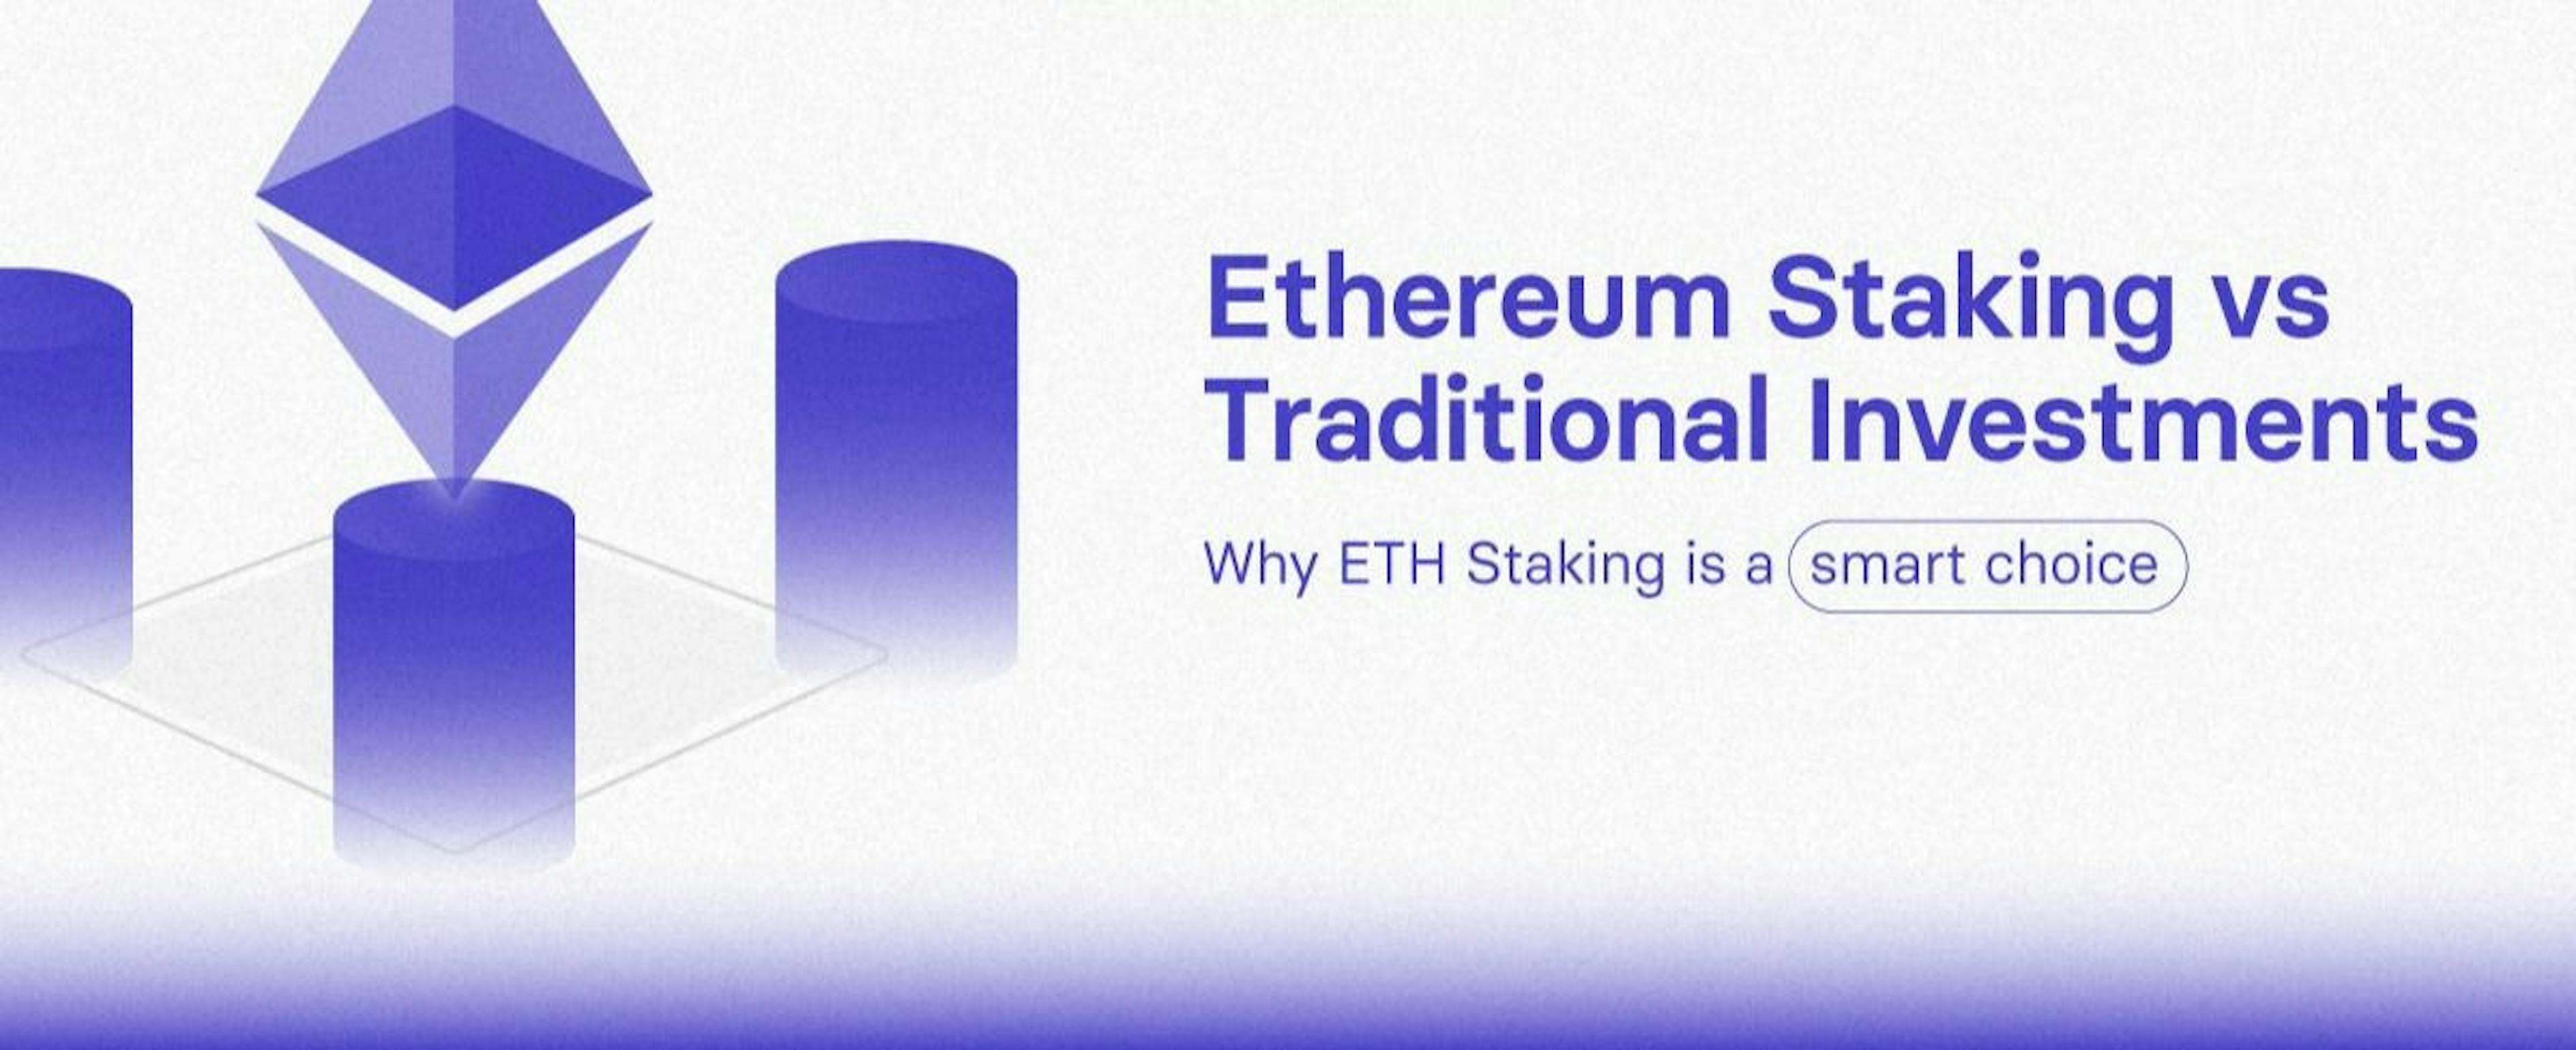 featured image - Ethereum Staking vs Traditional Investments